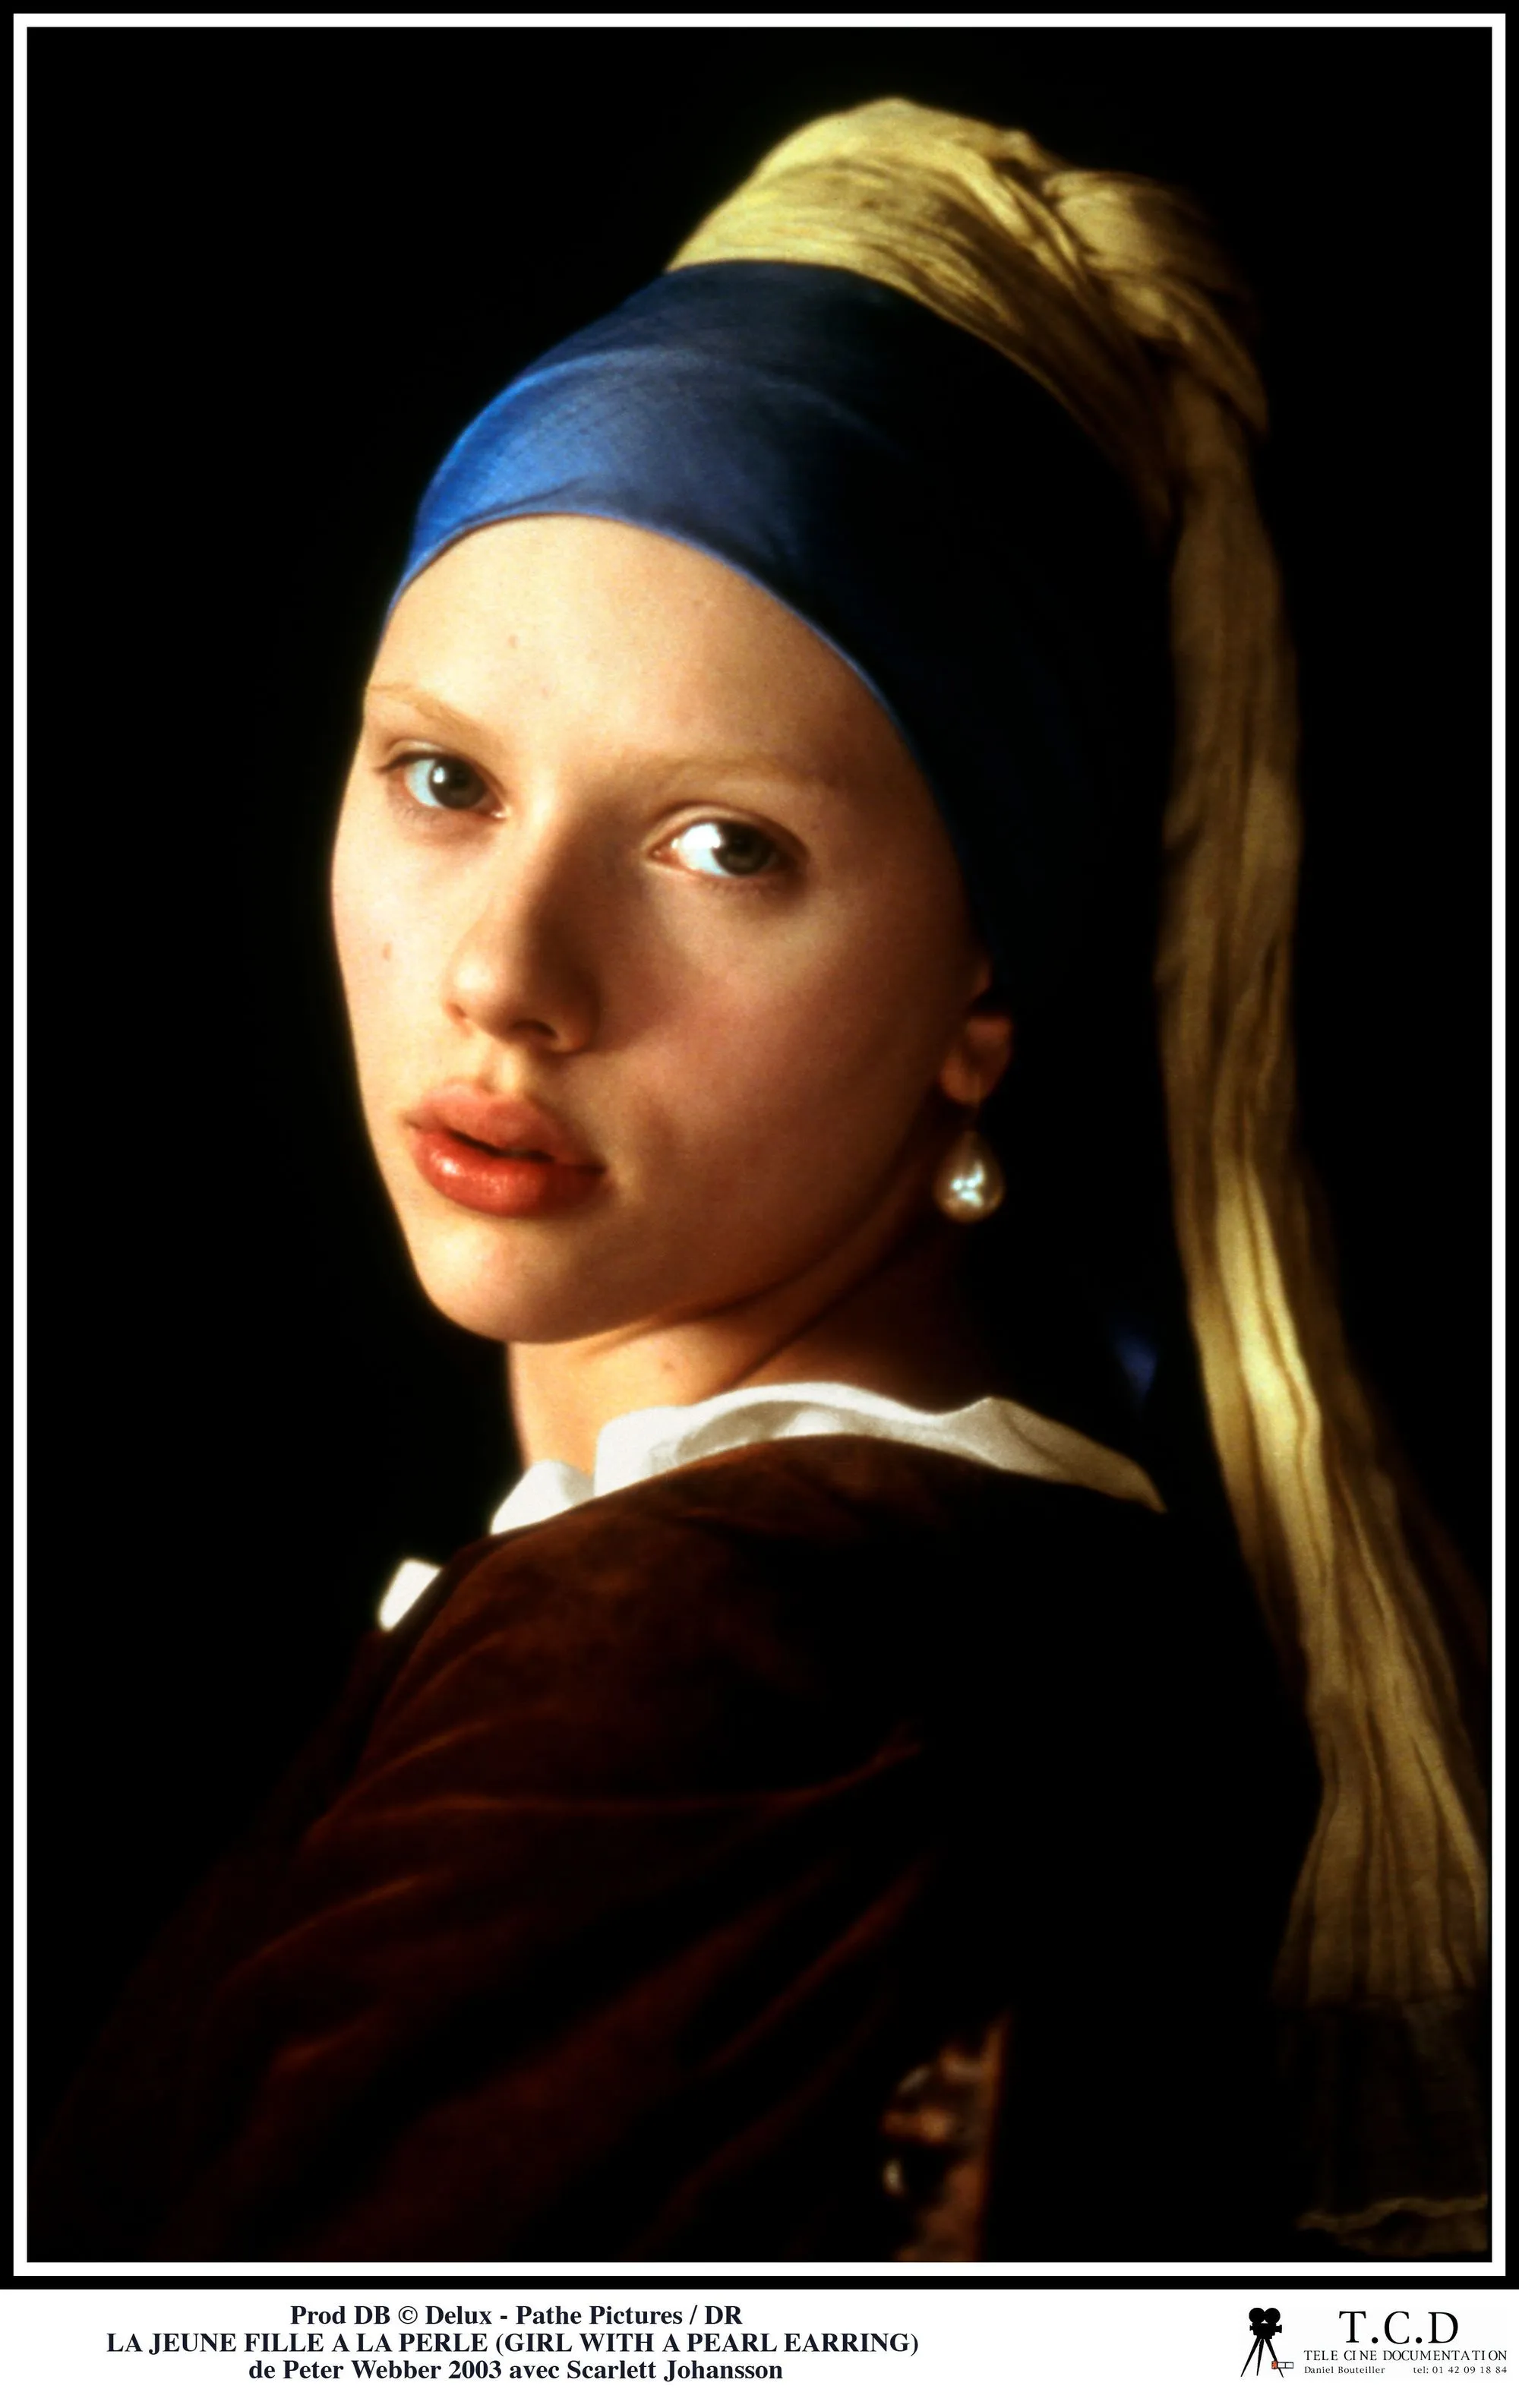 The Girl With A Pearl Earring.